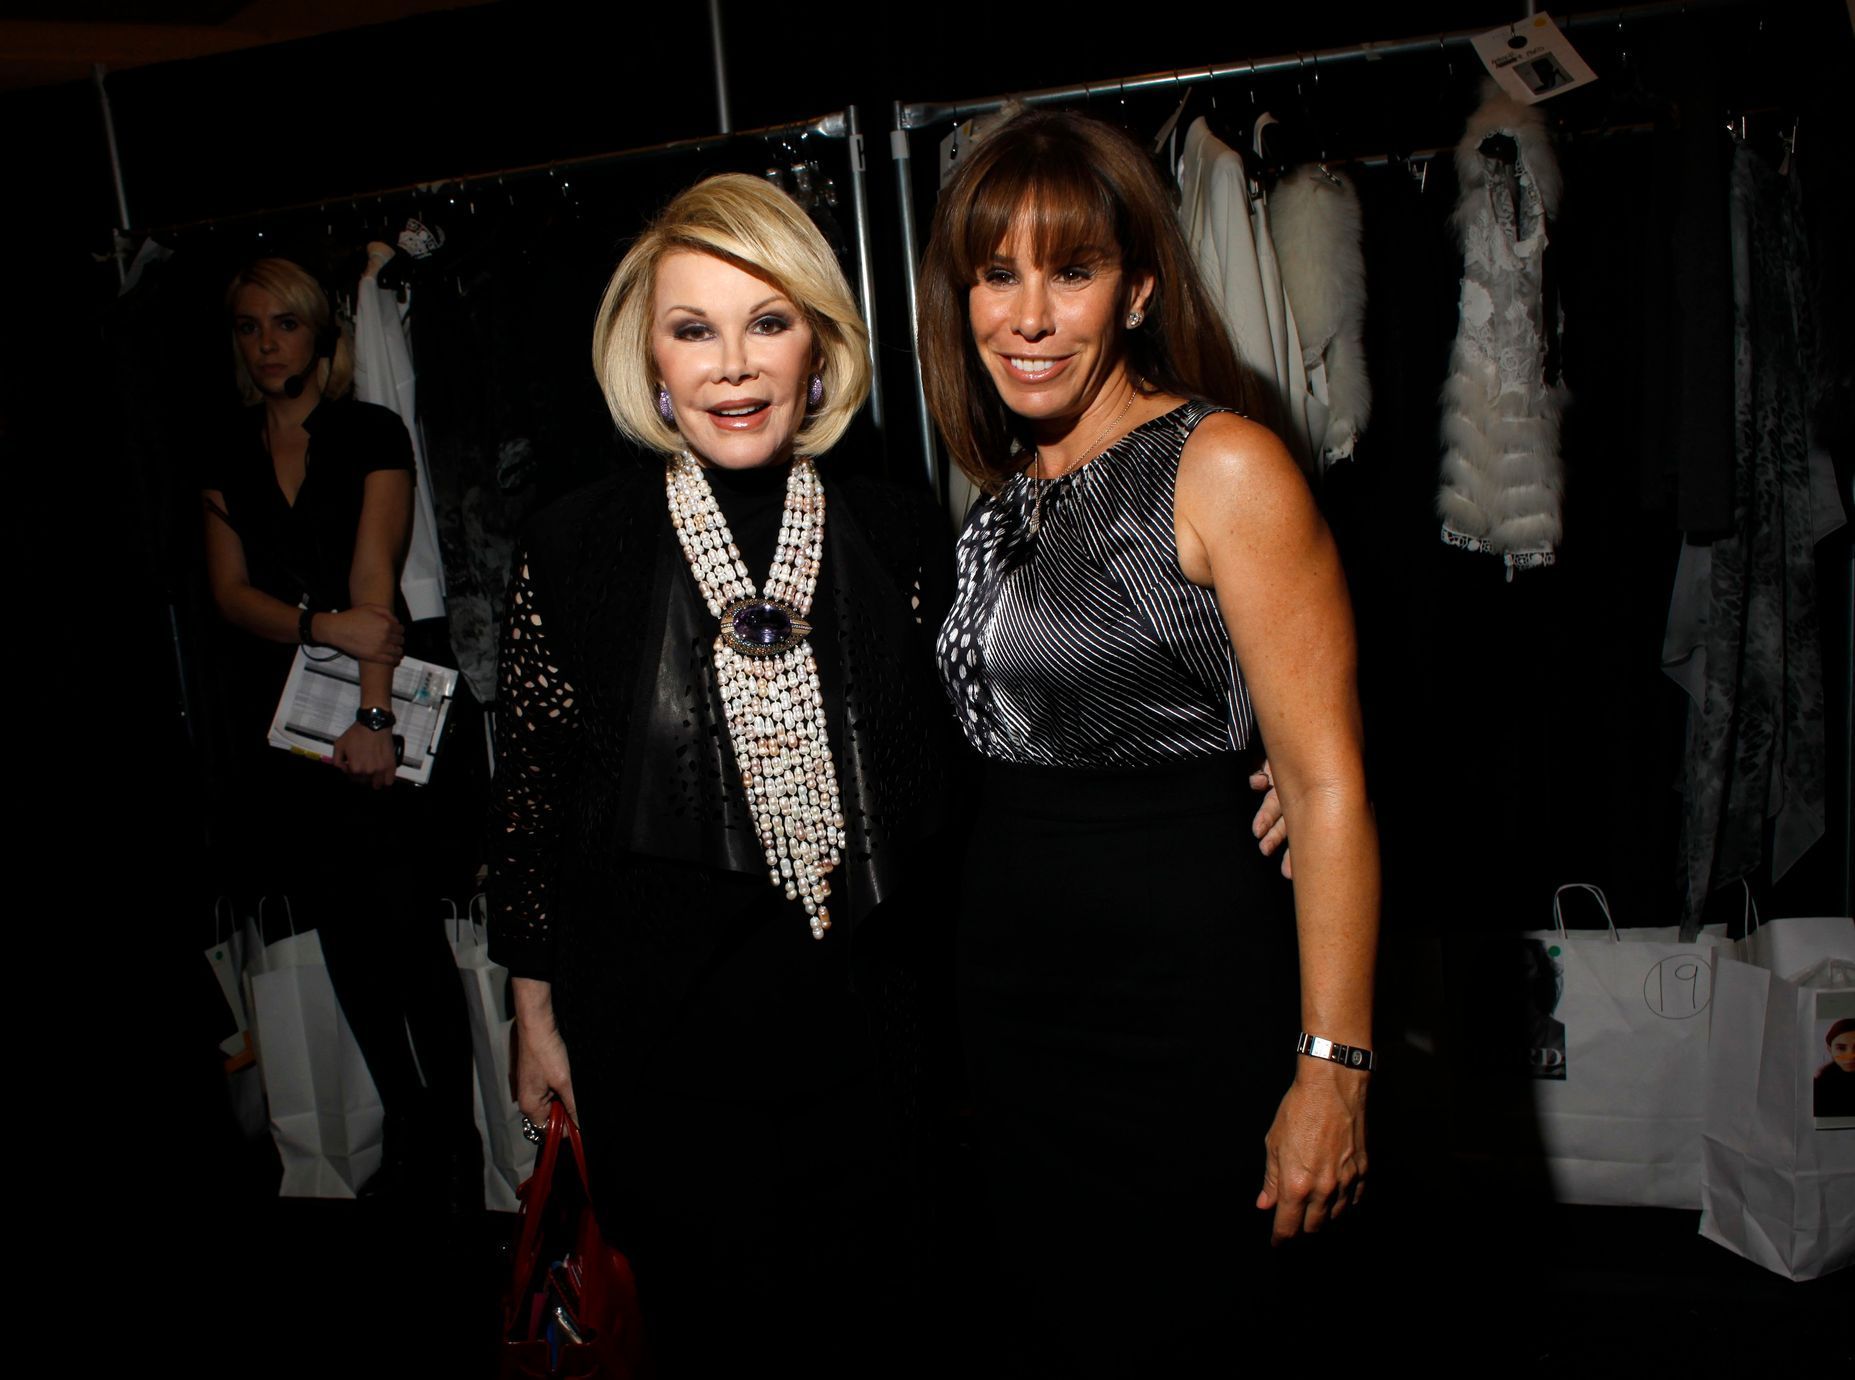 File photo of comedian Joan Rivers and TV personality Melissa Rivers attending the Elie Tahari Fall/Winter 2011 collection show during New York Fashion Week